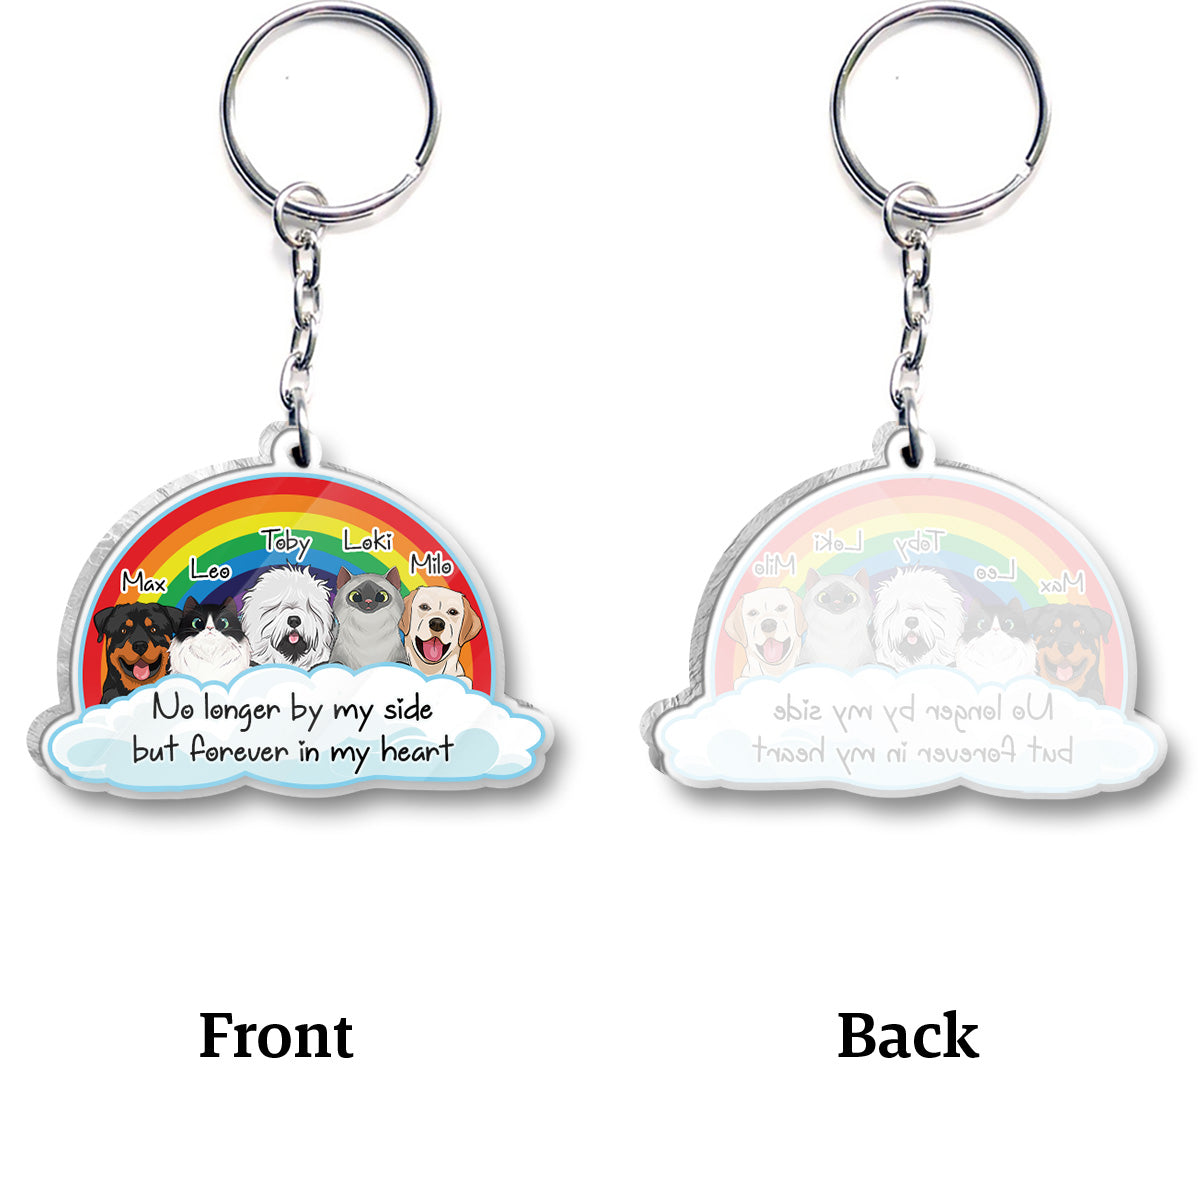 No Longer By My Side - Personalized Dog Keychain (Printed On Both Sides)